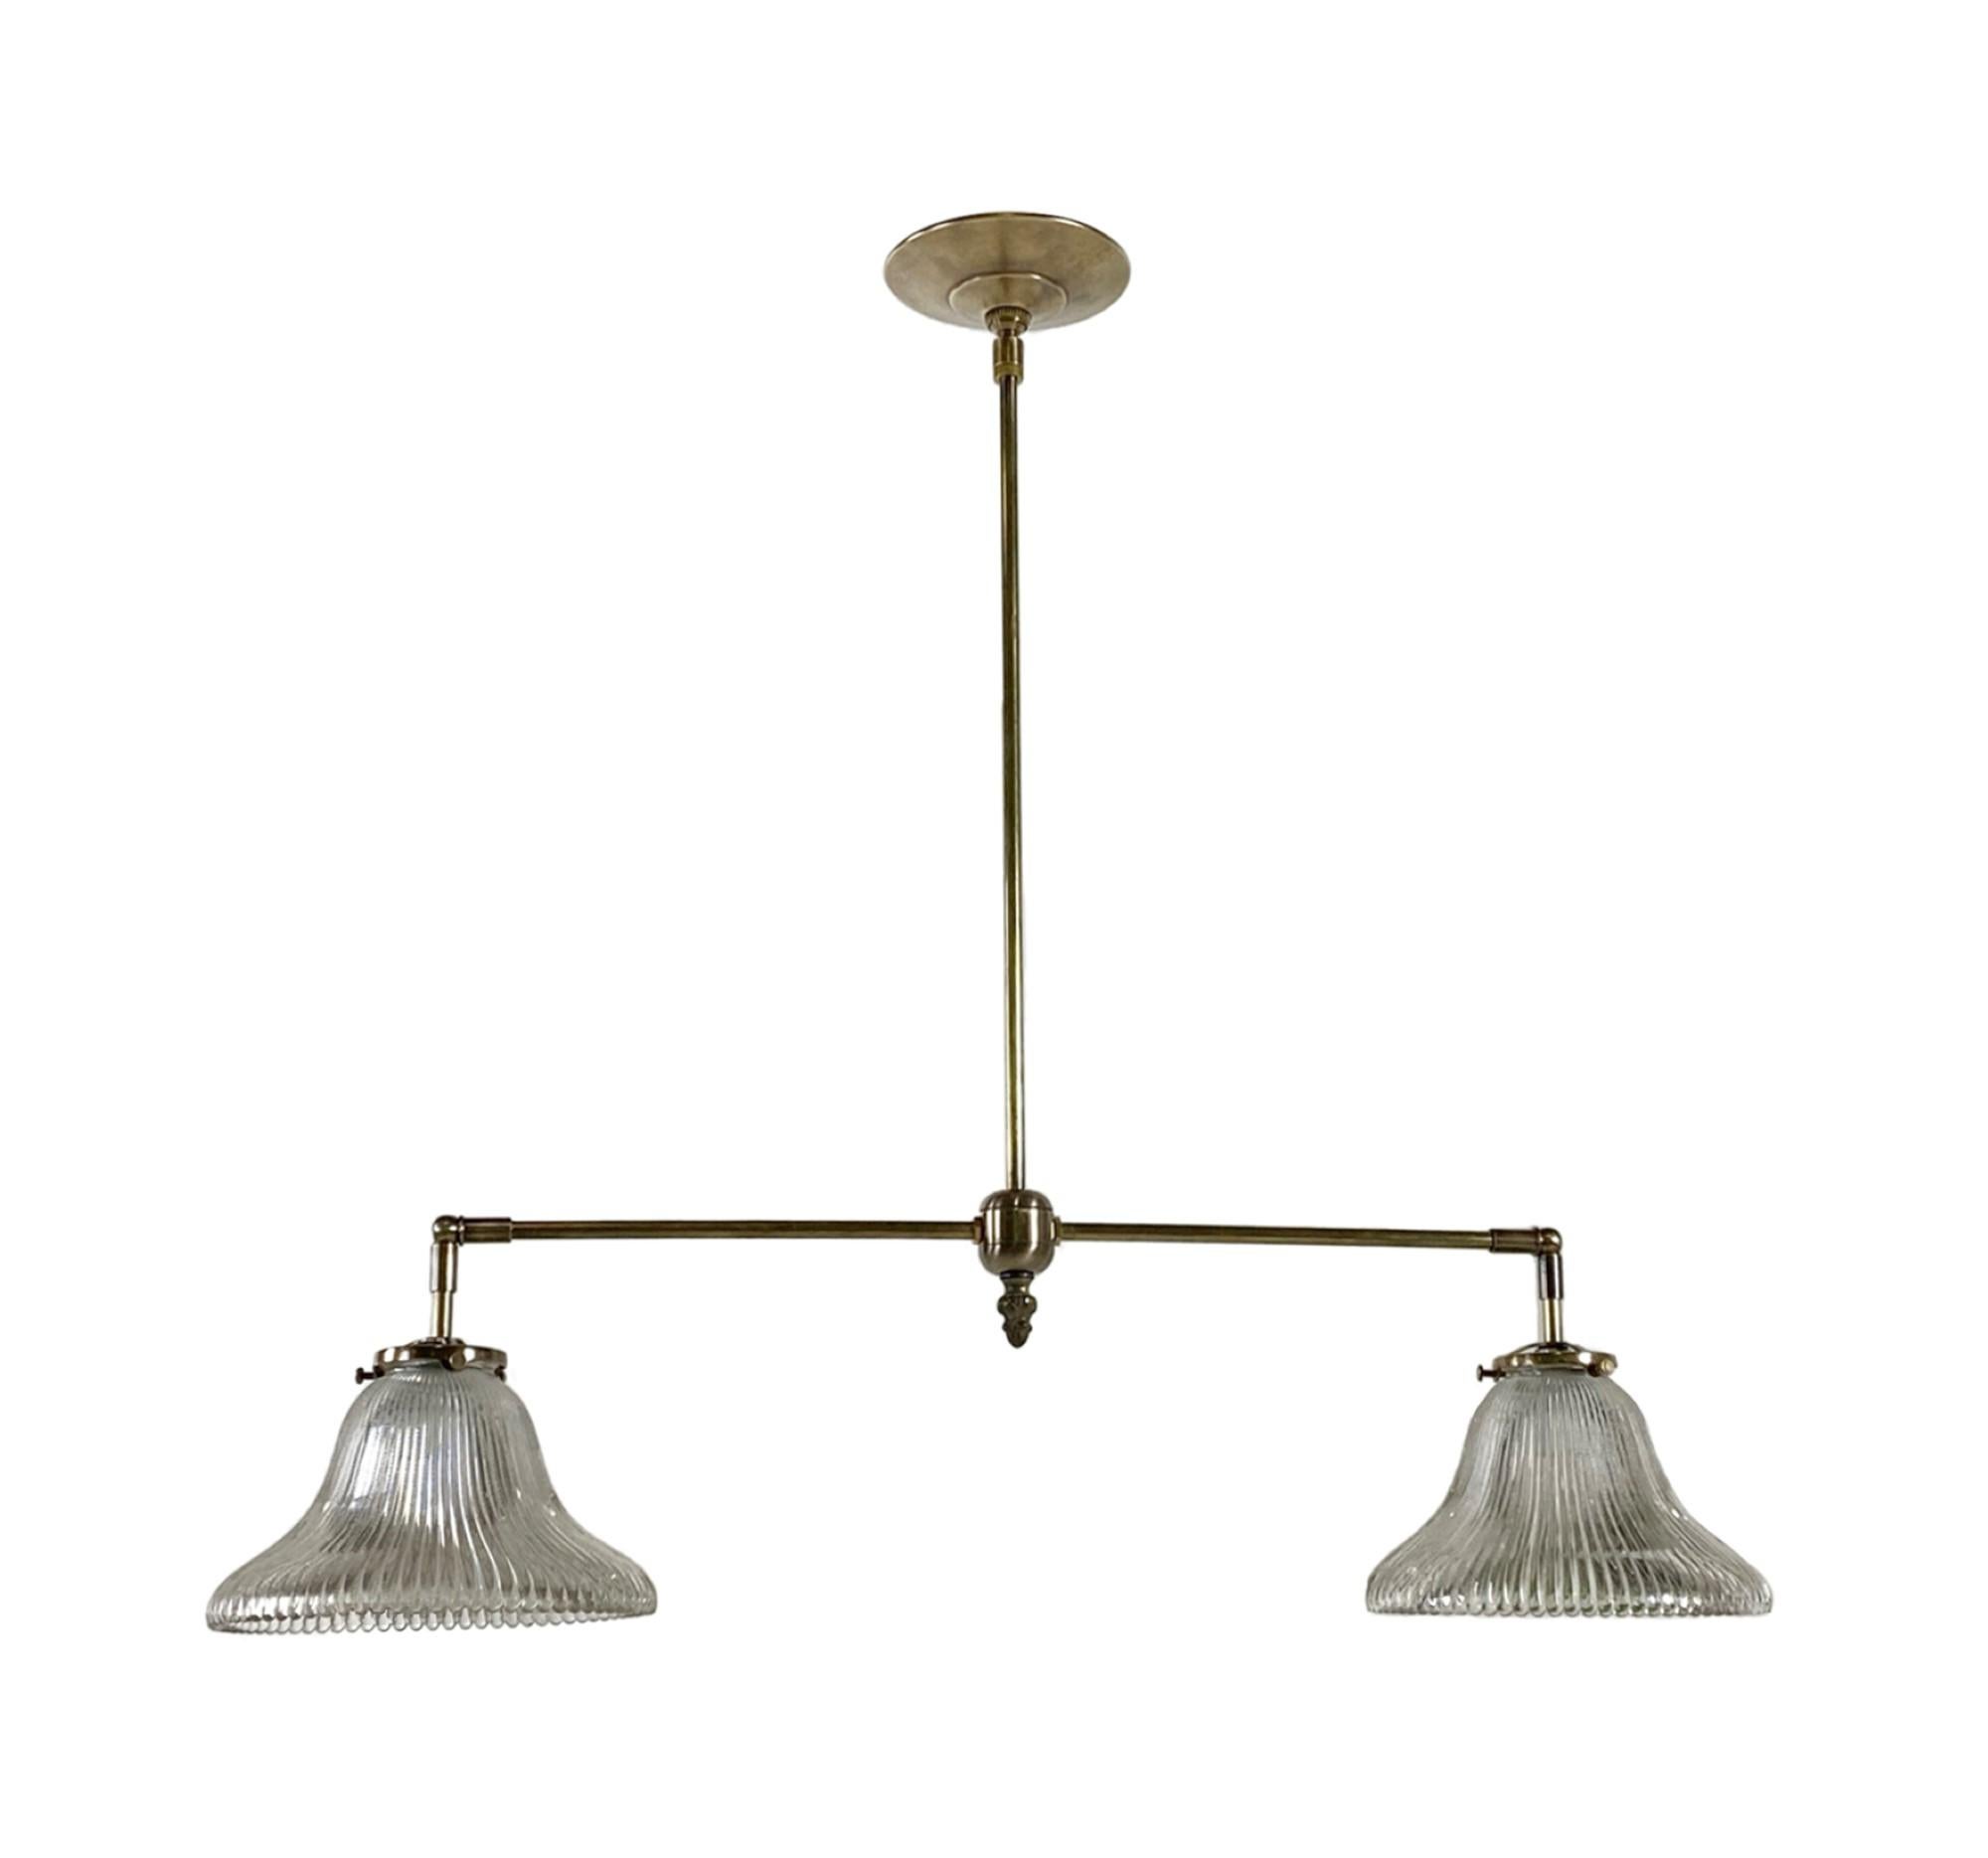 2010s Industrial style double pin striped prism glass pendant light with a new brass frame. Antique brass finish. This can be seen at our 400 Gilligan St location in Scranton, PA.